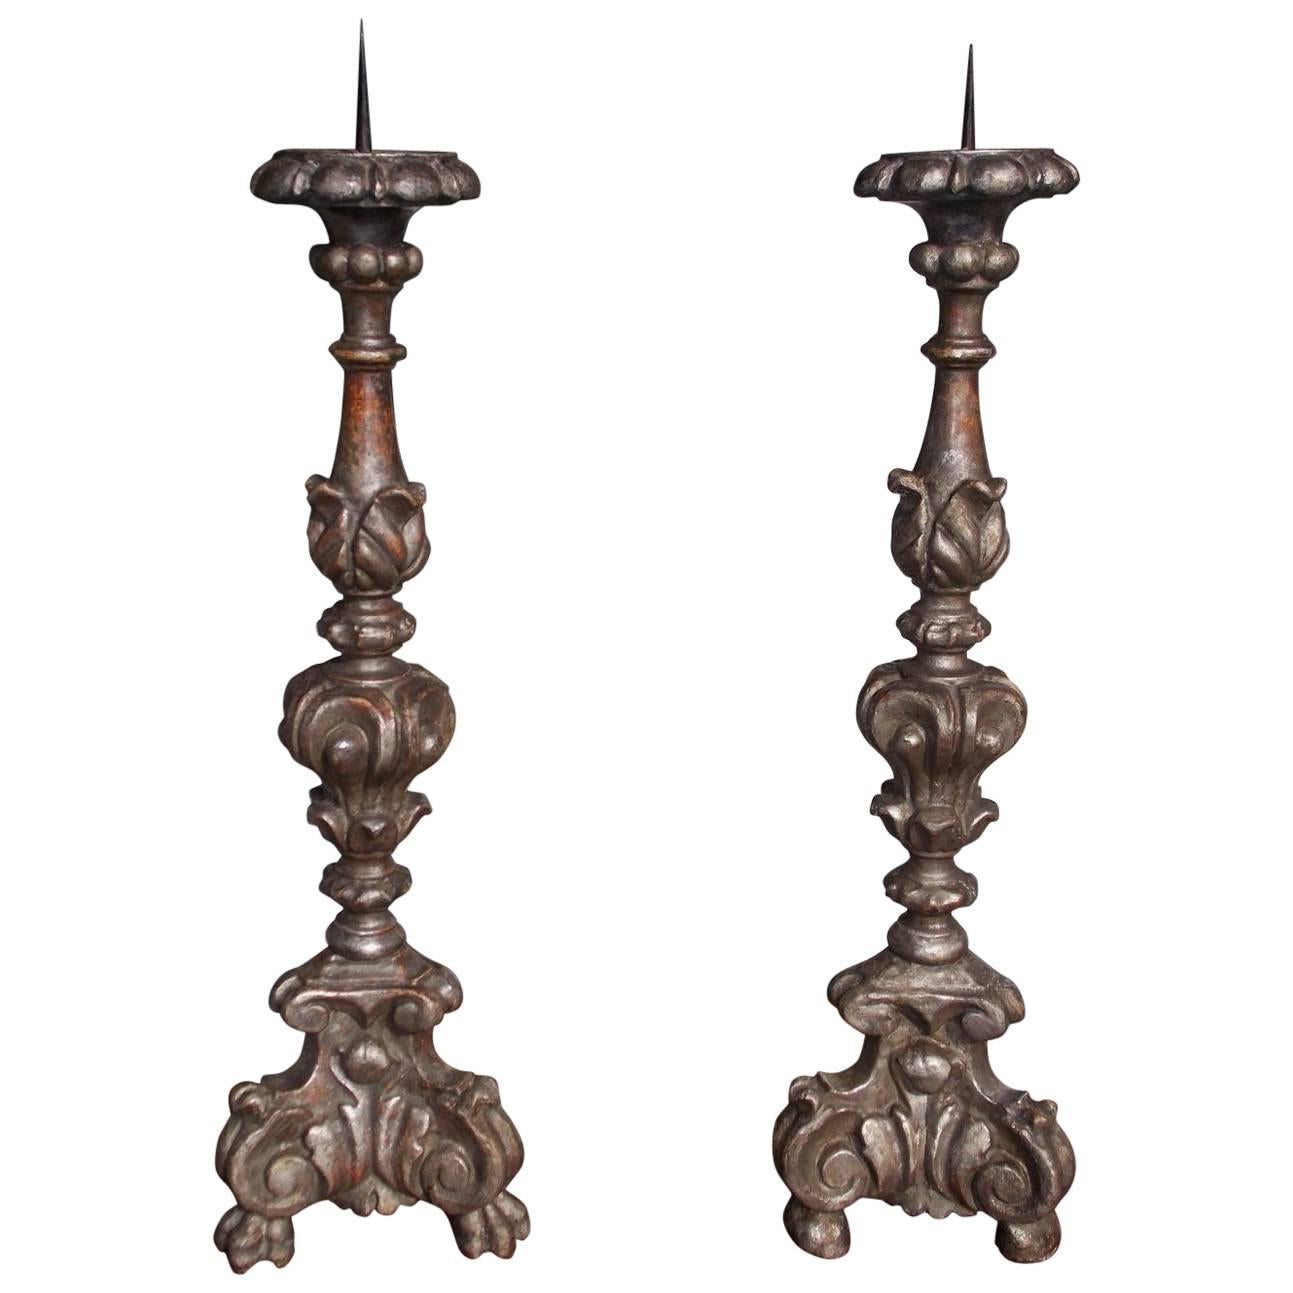 Pair of Italian Carved Wood and Silver Gilt Floral Prickets, Circa 1750 For Sale